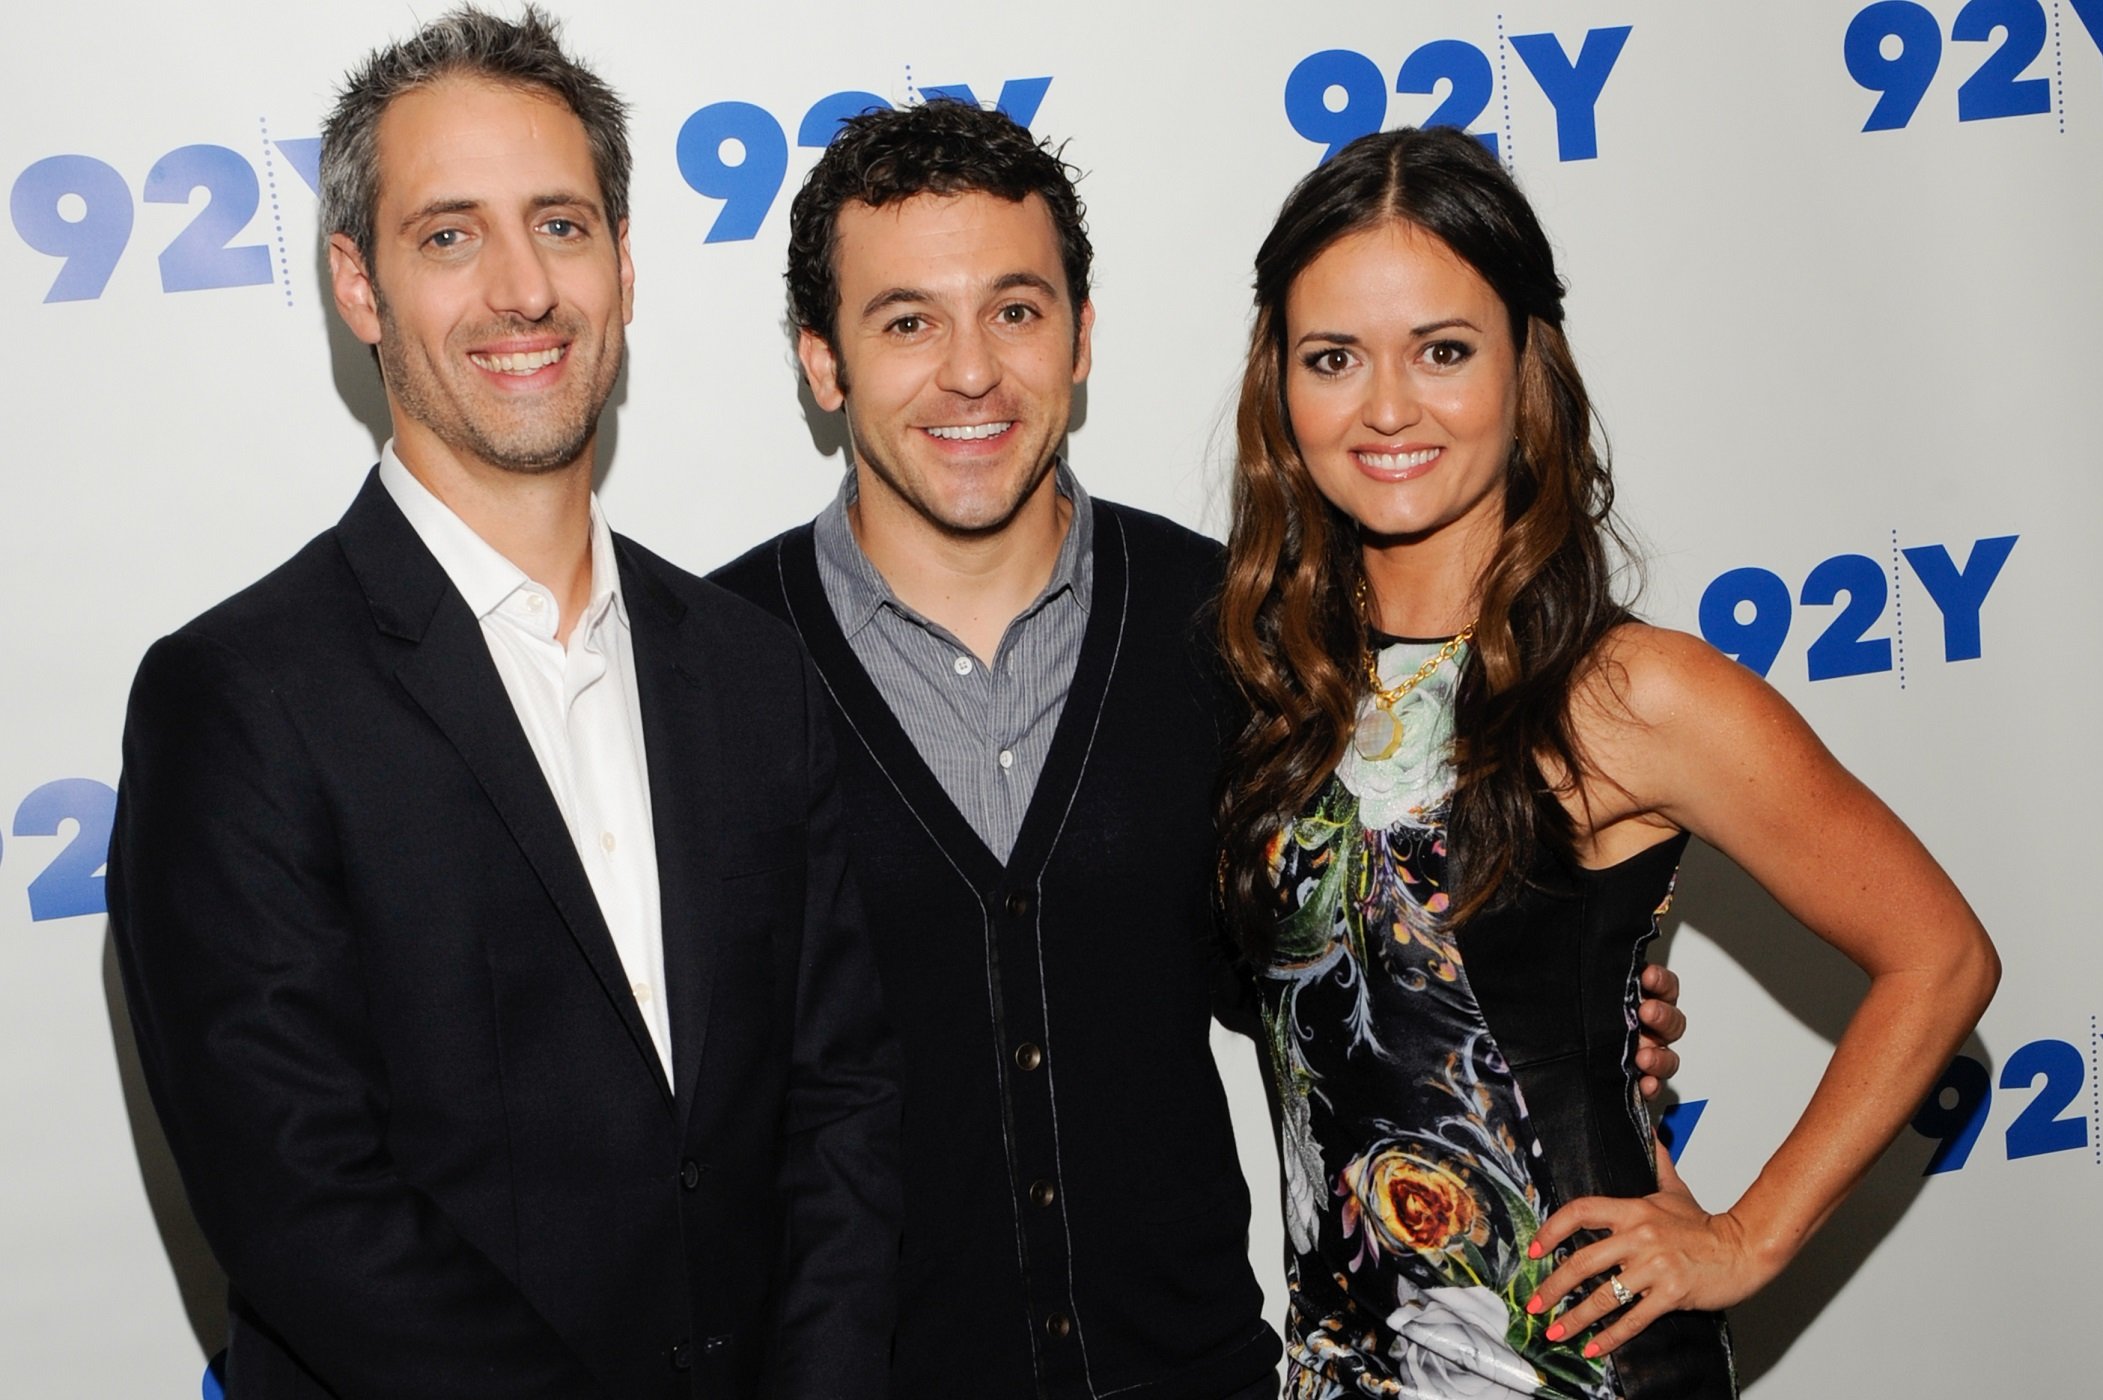 Josh Saviano, Fred Savage and Danica McKeller reunite at the 92nd Street Y for 'The Wonder Years Reunion'